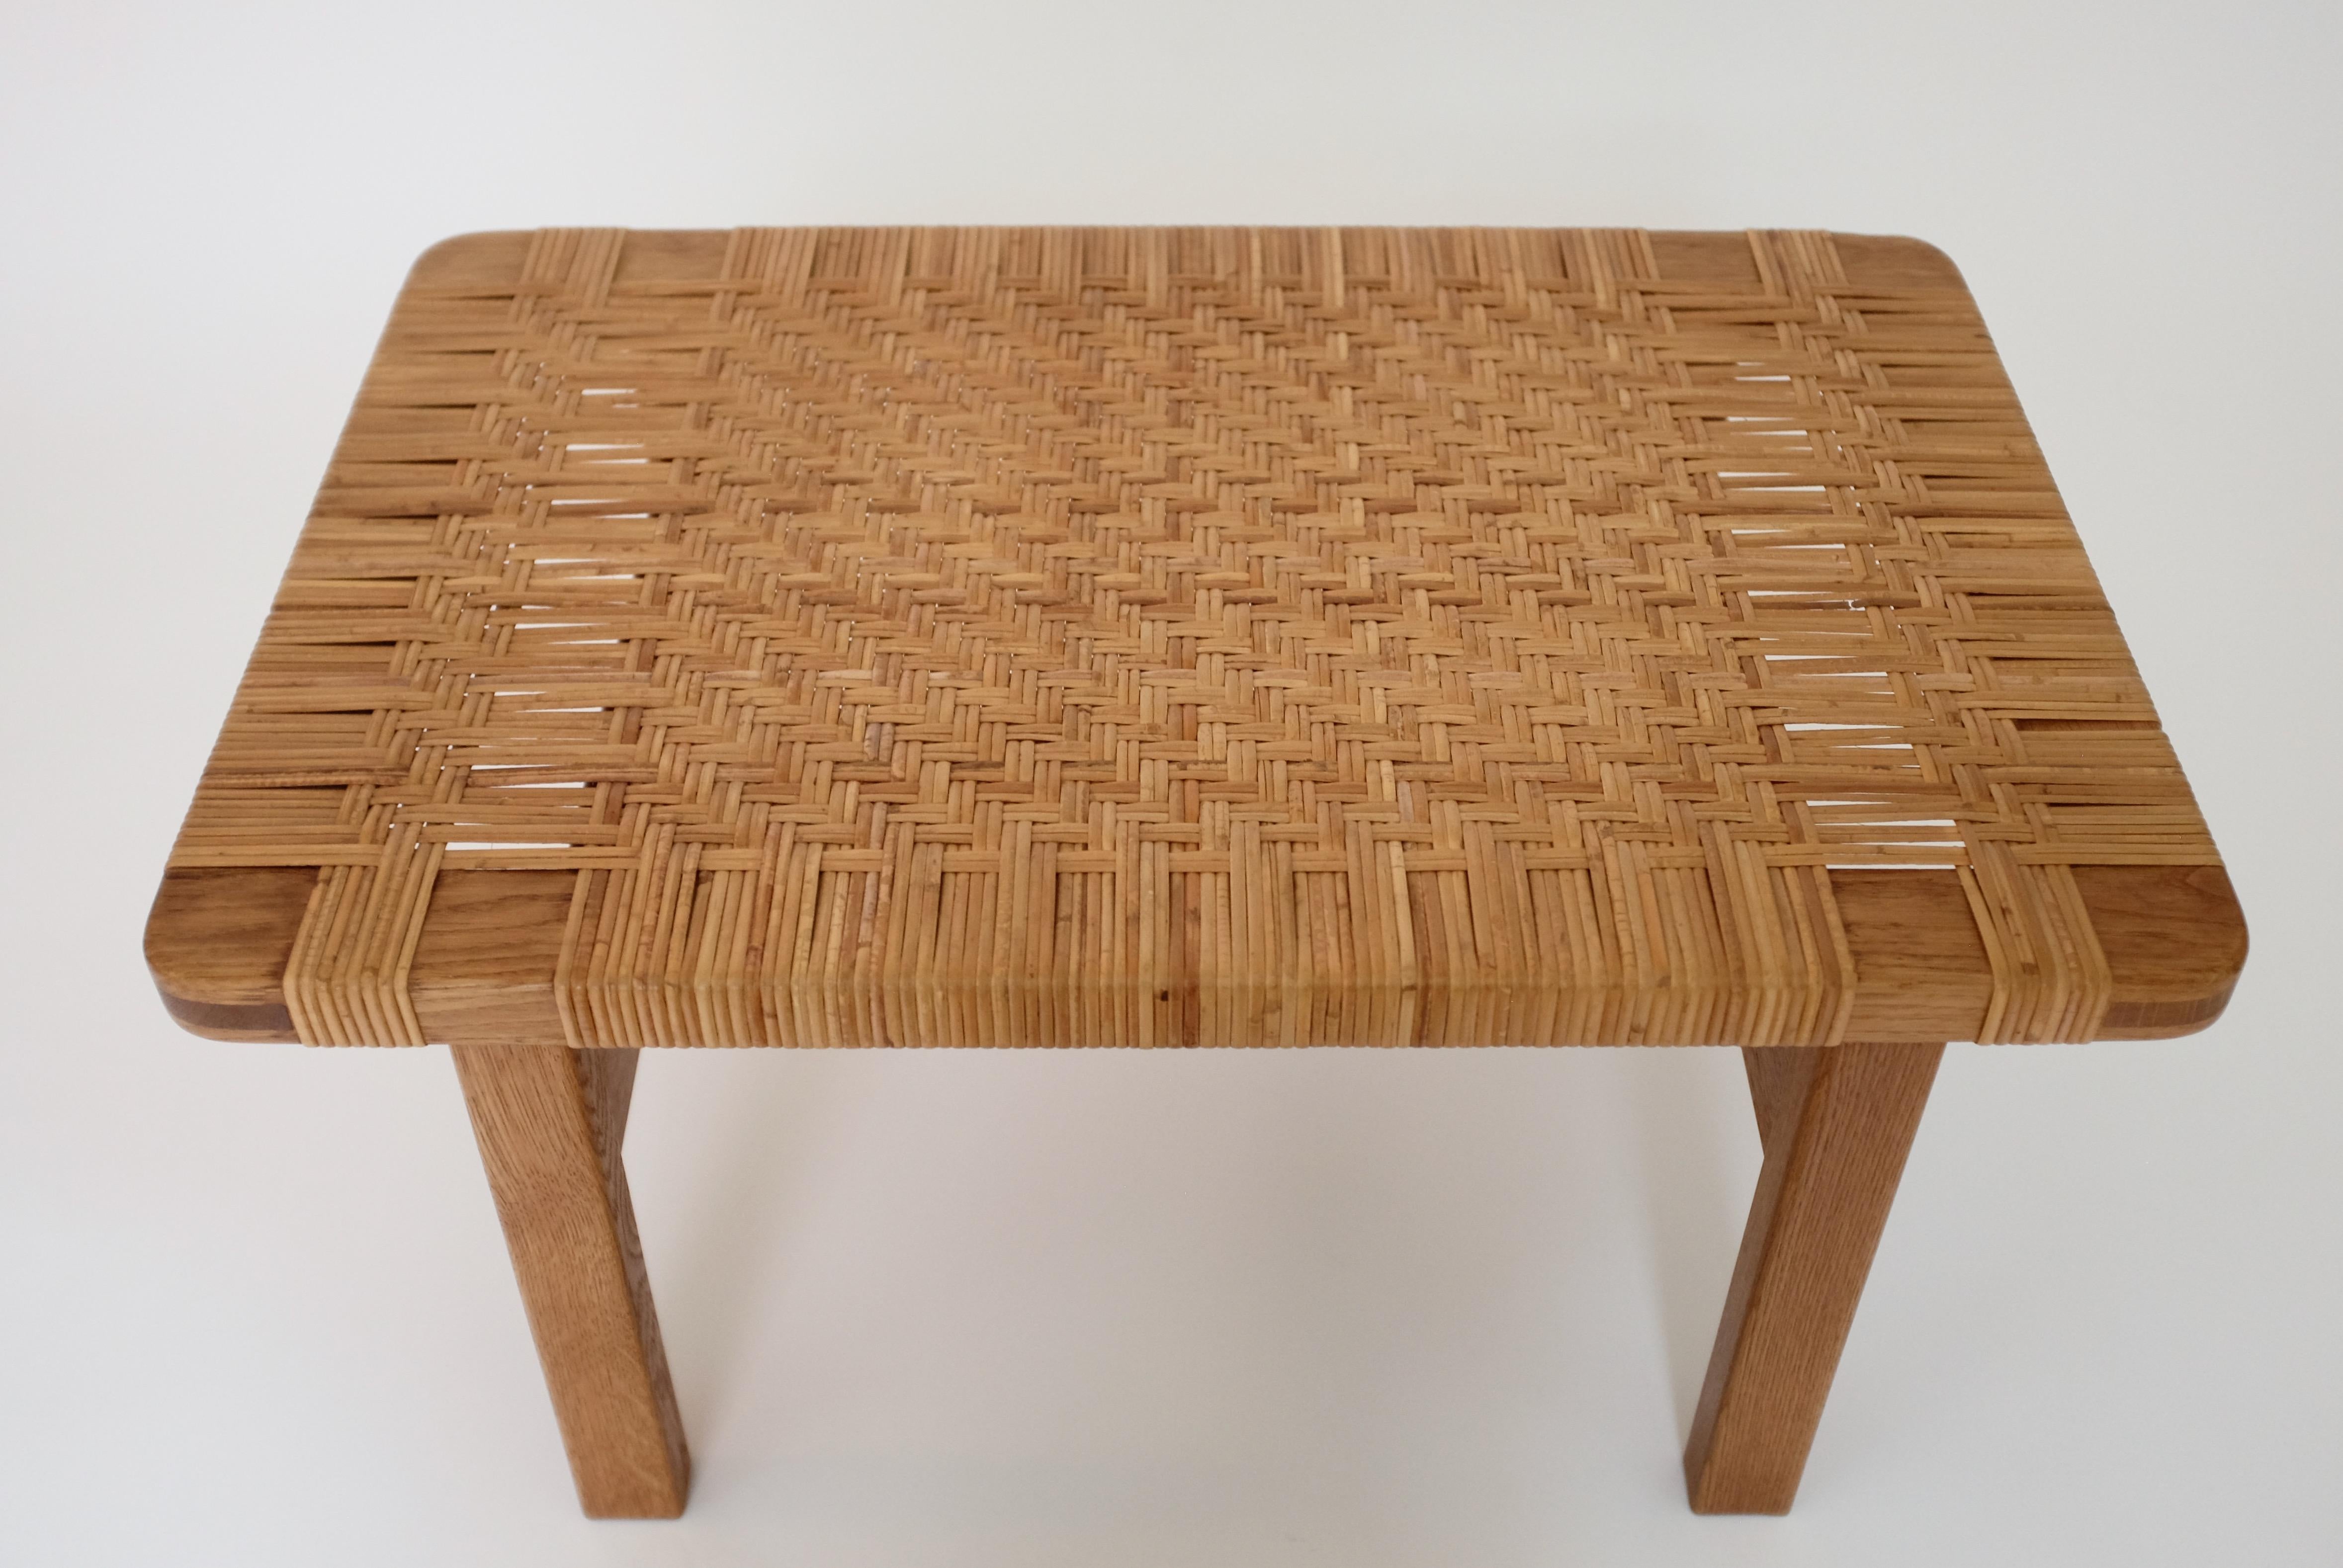 Iconic cane and oak side table by Børge Mogensen for Fredericia Stolefabrik, Denmark. Designed and manufactured in the 1950's it has the classic traits of Børge Mogensen with practical design and beautiful details. Woven cane across the table in a